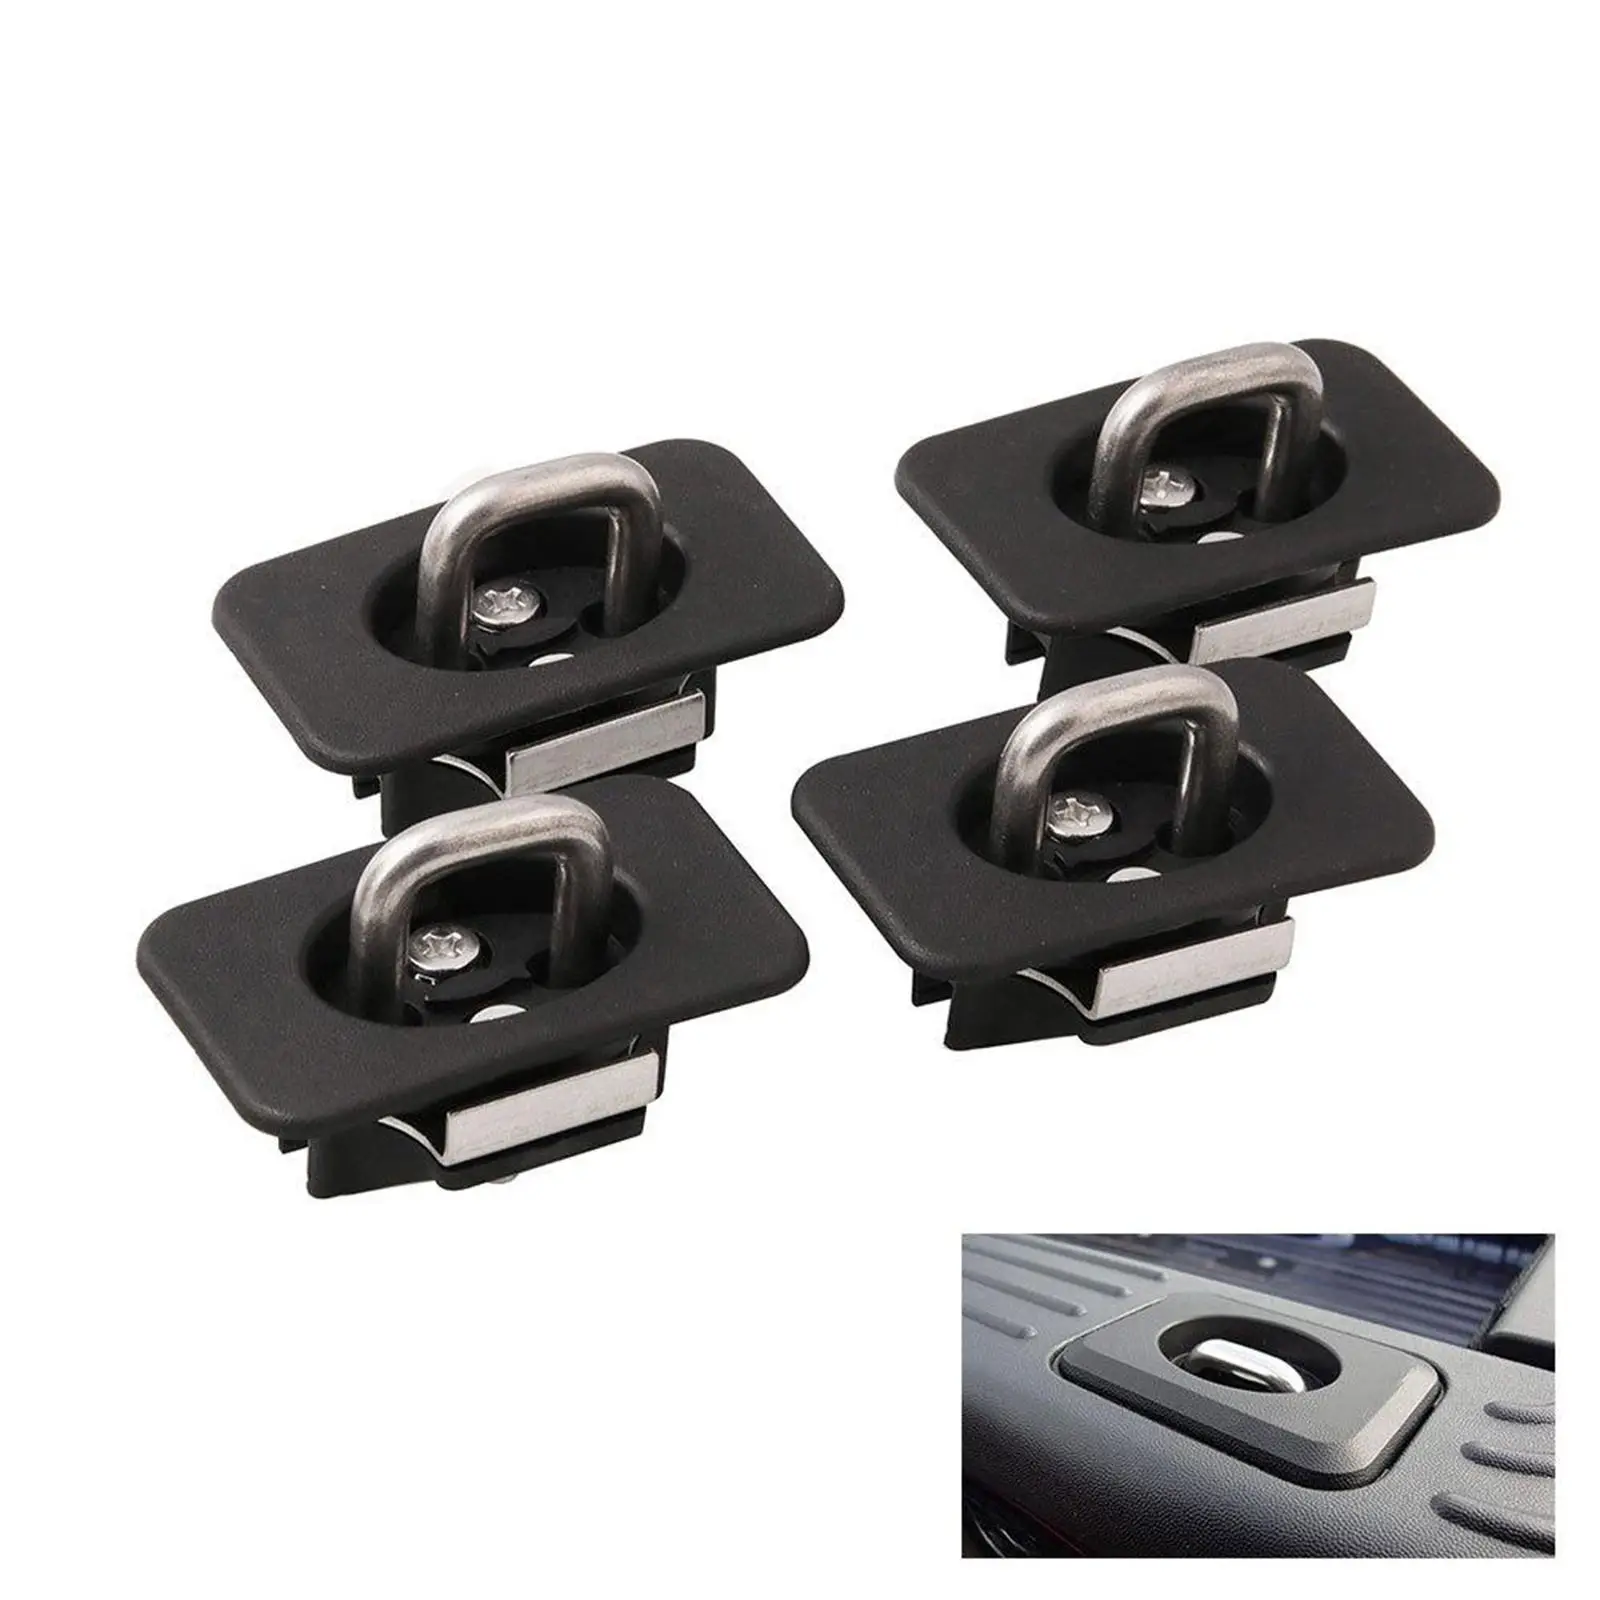 4Pcs Truck Tie-Down Anchor for Ford Raptor F-150 98-14 Car Accessories, Easy to Install